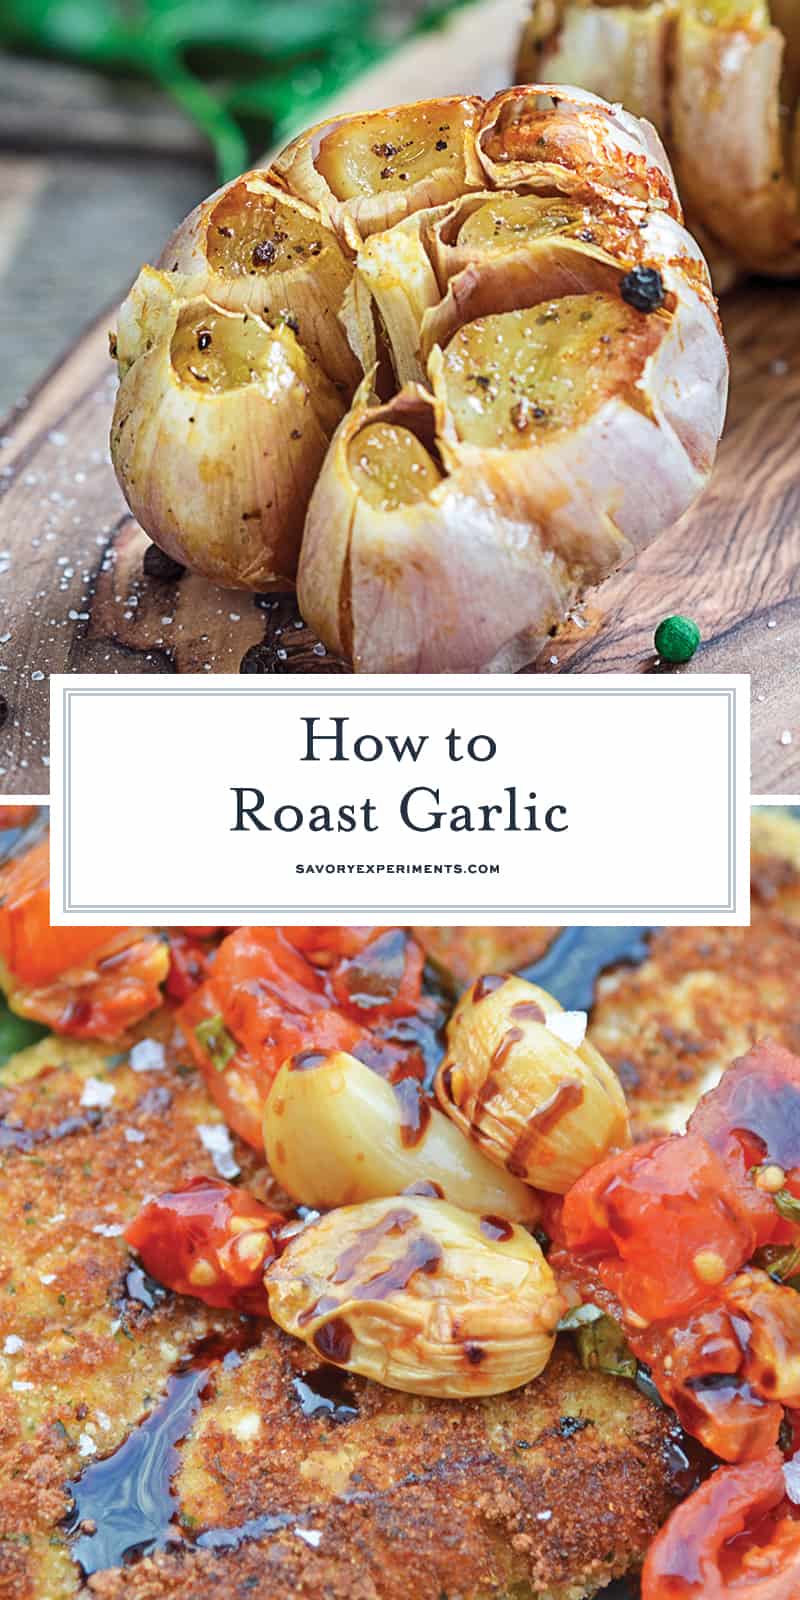 How to Roast Garlic - Savory Experiments